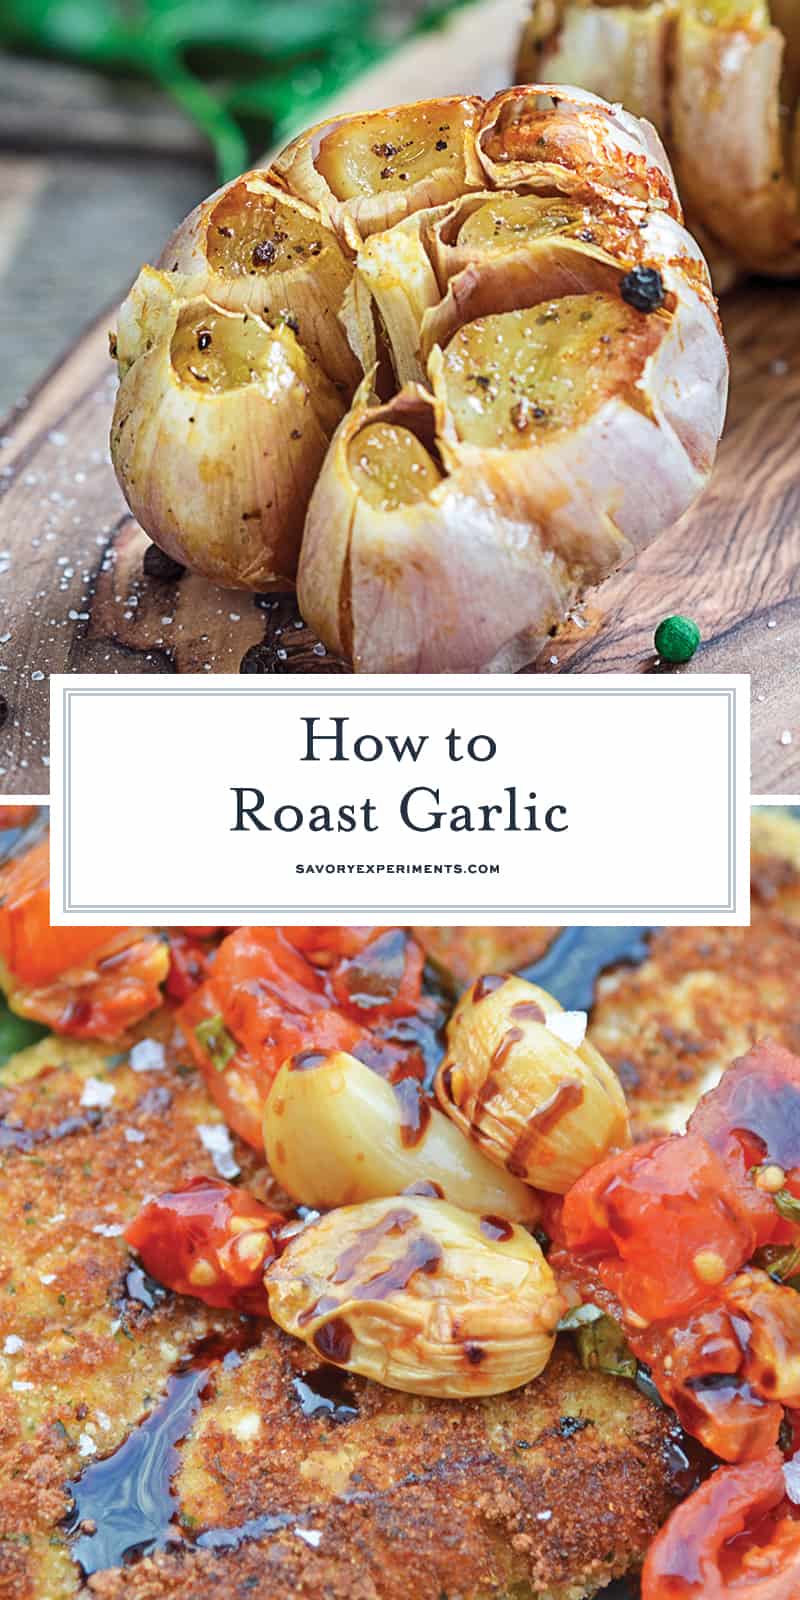 How to Roast Garlic - Savory Experiments